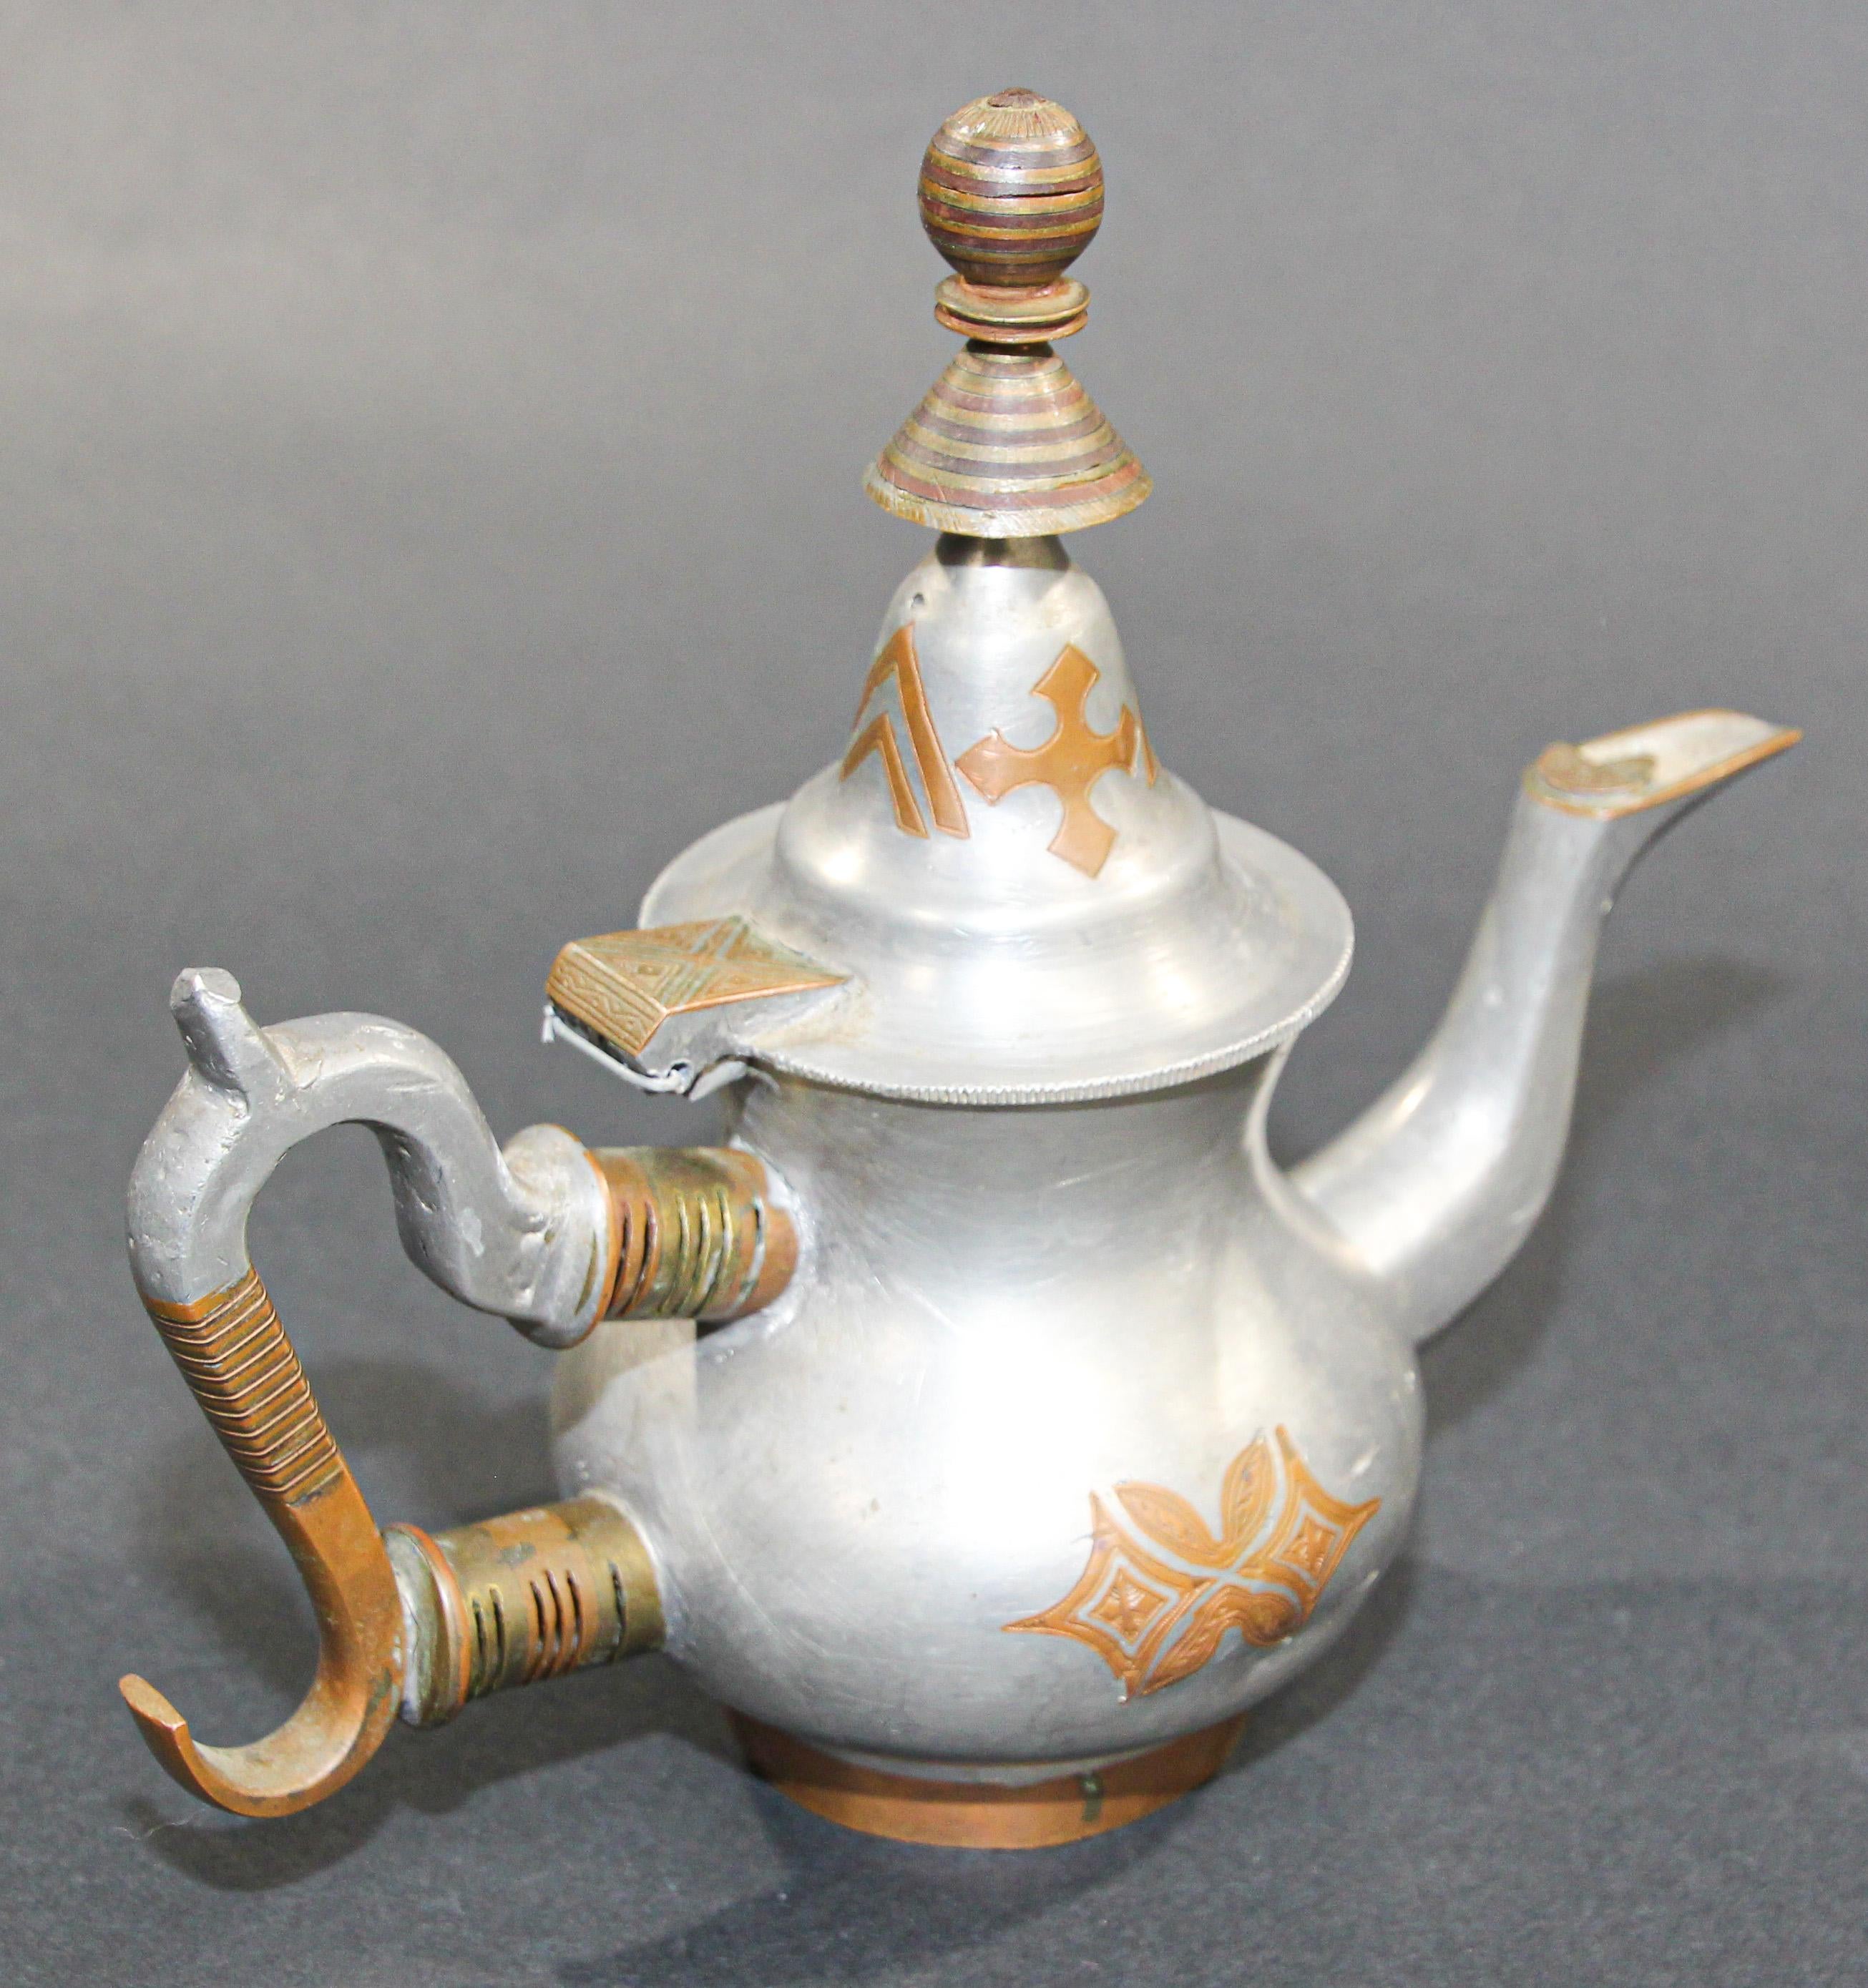 Tuareg African Pewter Tea Pot from Mauritania In Good Condition For Sale In North Hollywood, CA